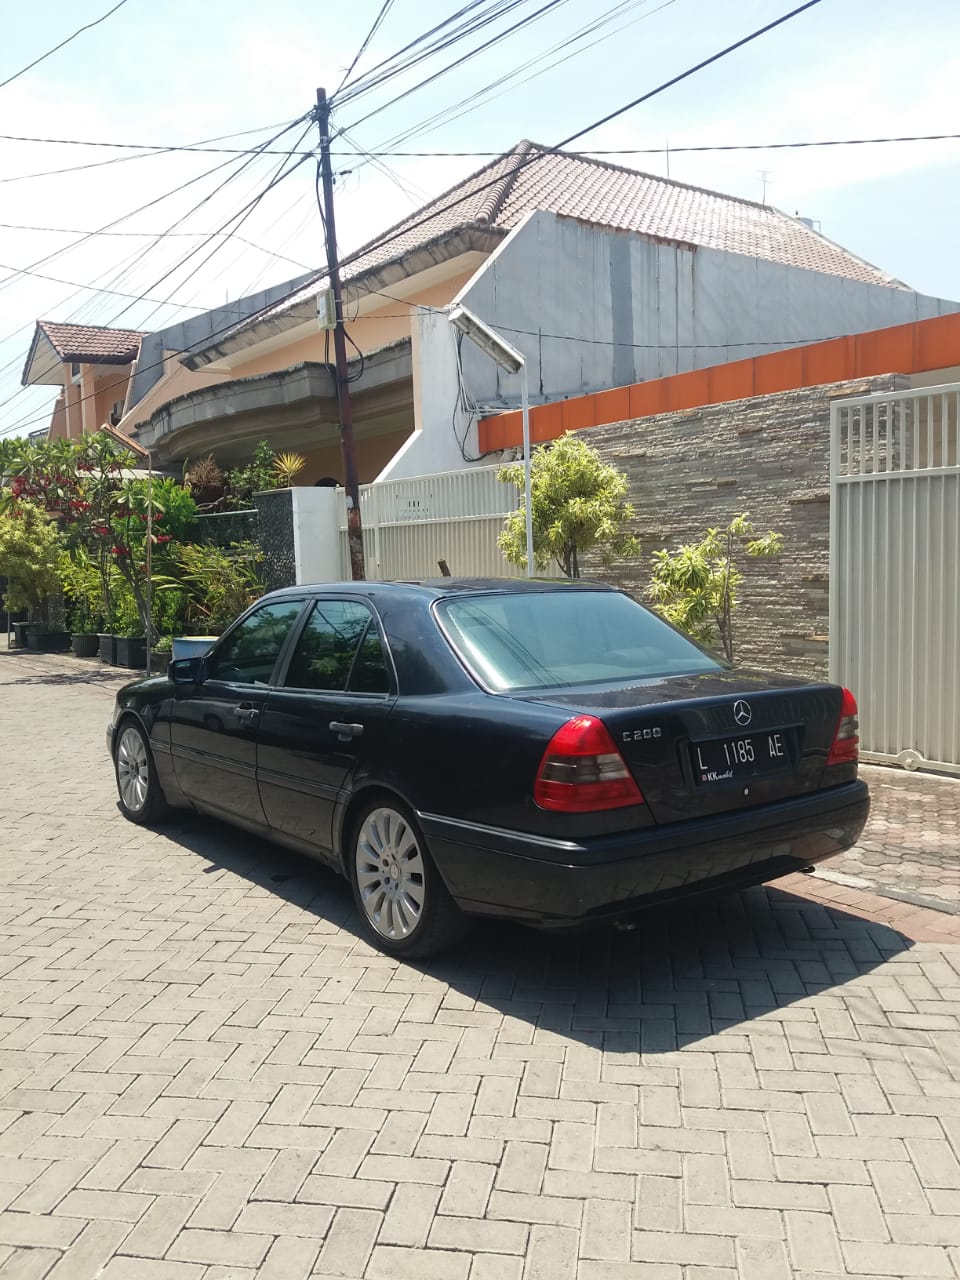 Used 1997 Mercedes Benz C-Class Sedan 200 Edition 200 Edition for sale